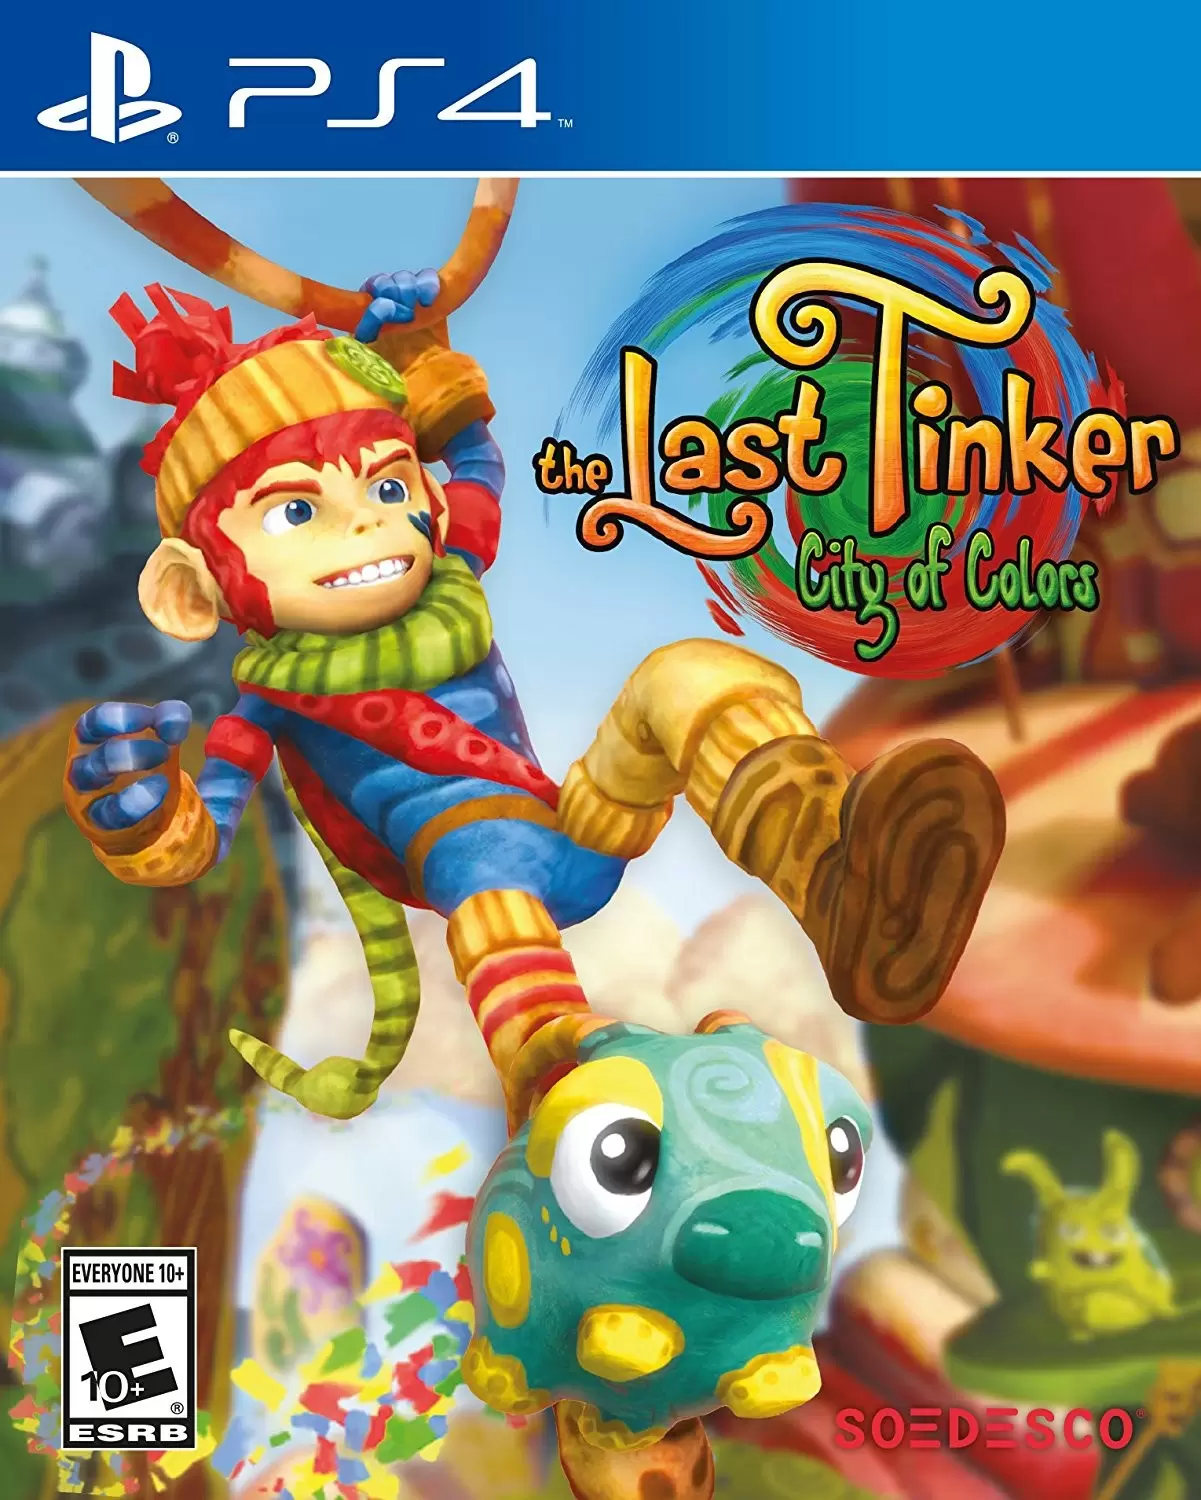 PS4 Games - The Last Tinker City of Colors